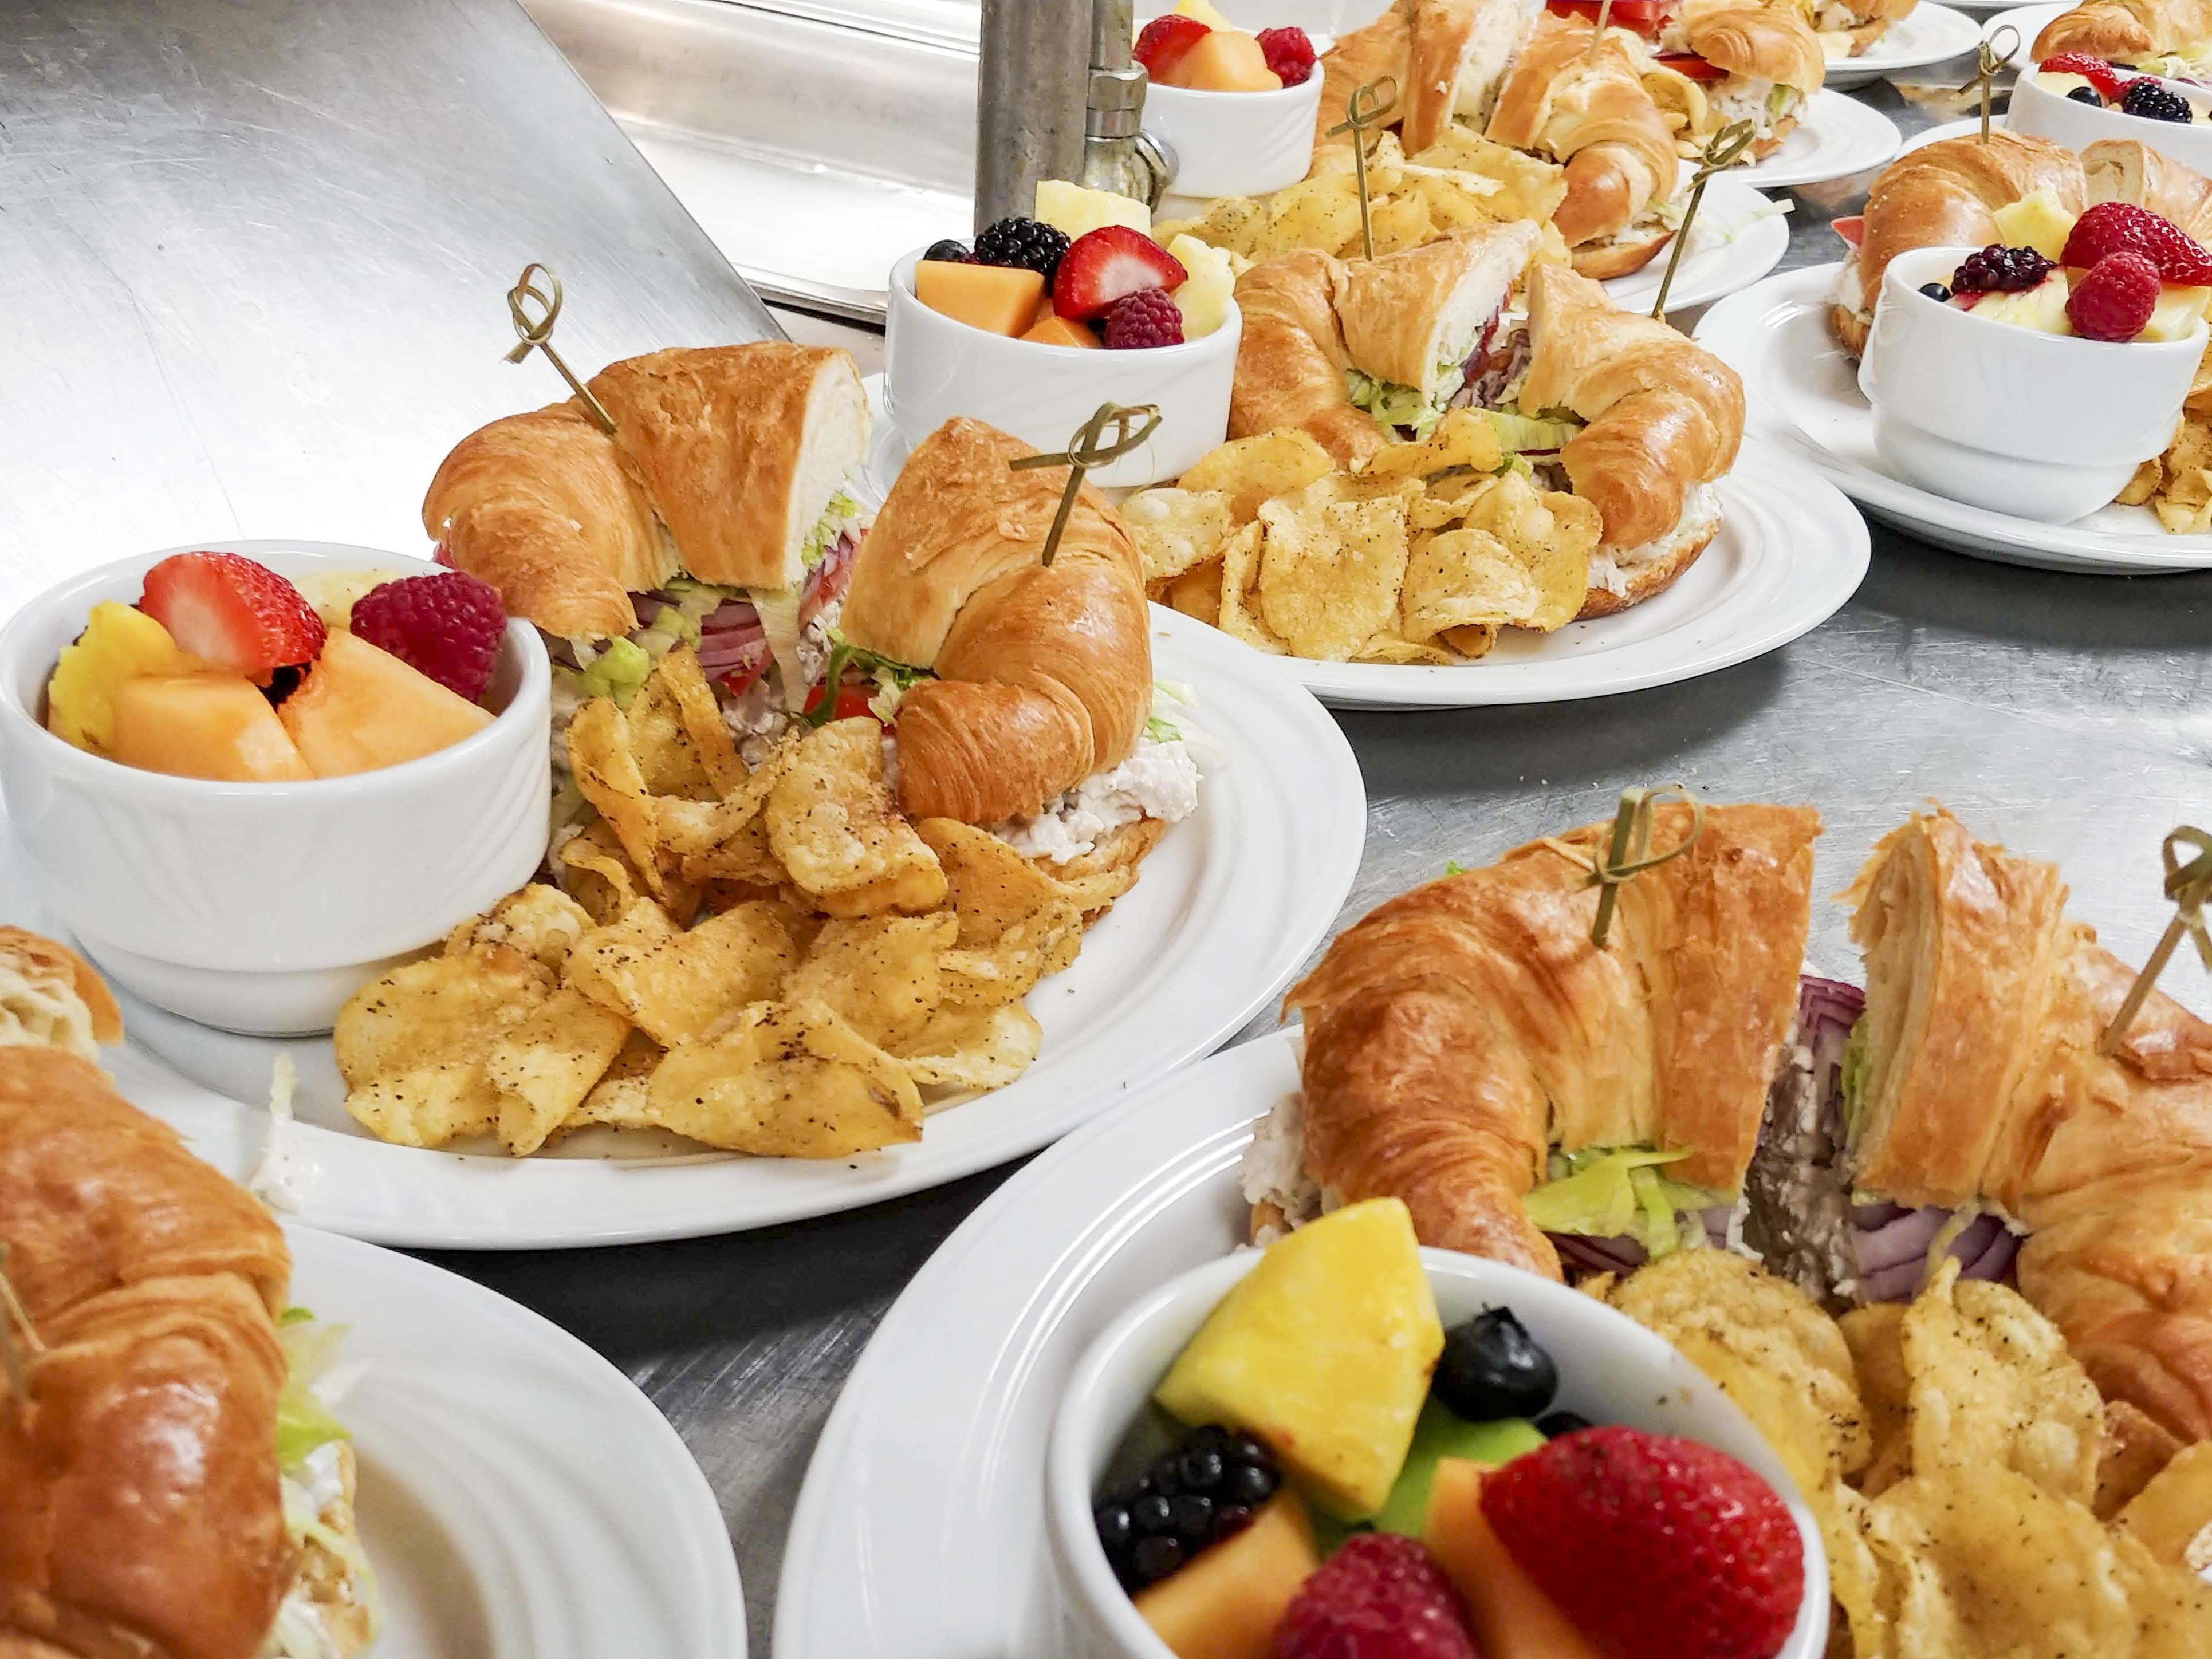 Close up photo of plates of sandwiches, fruit, and chips.